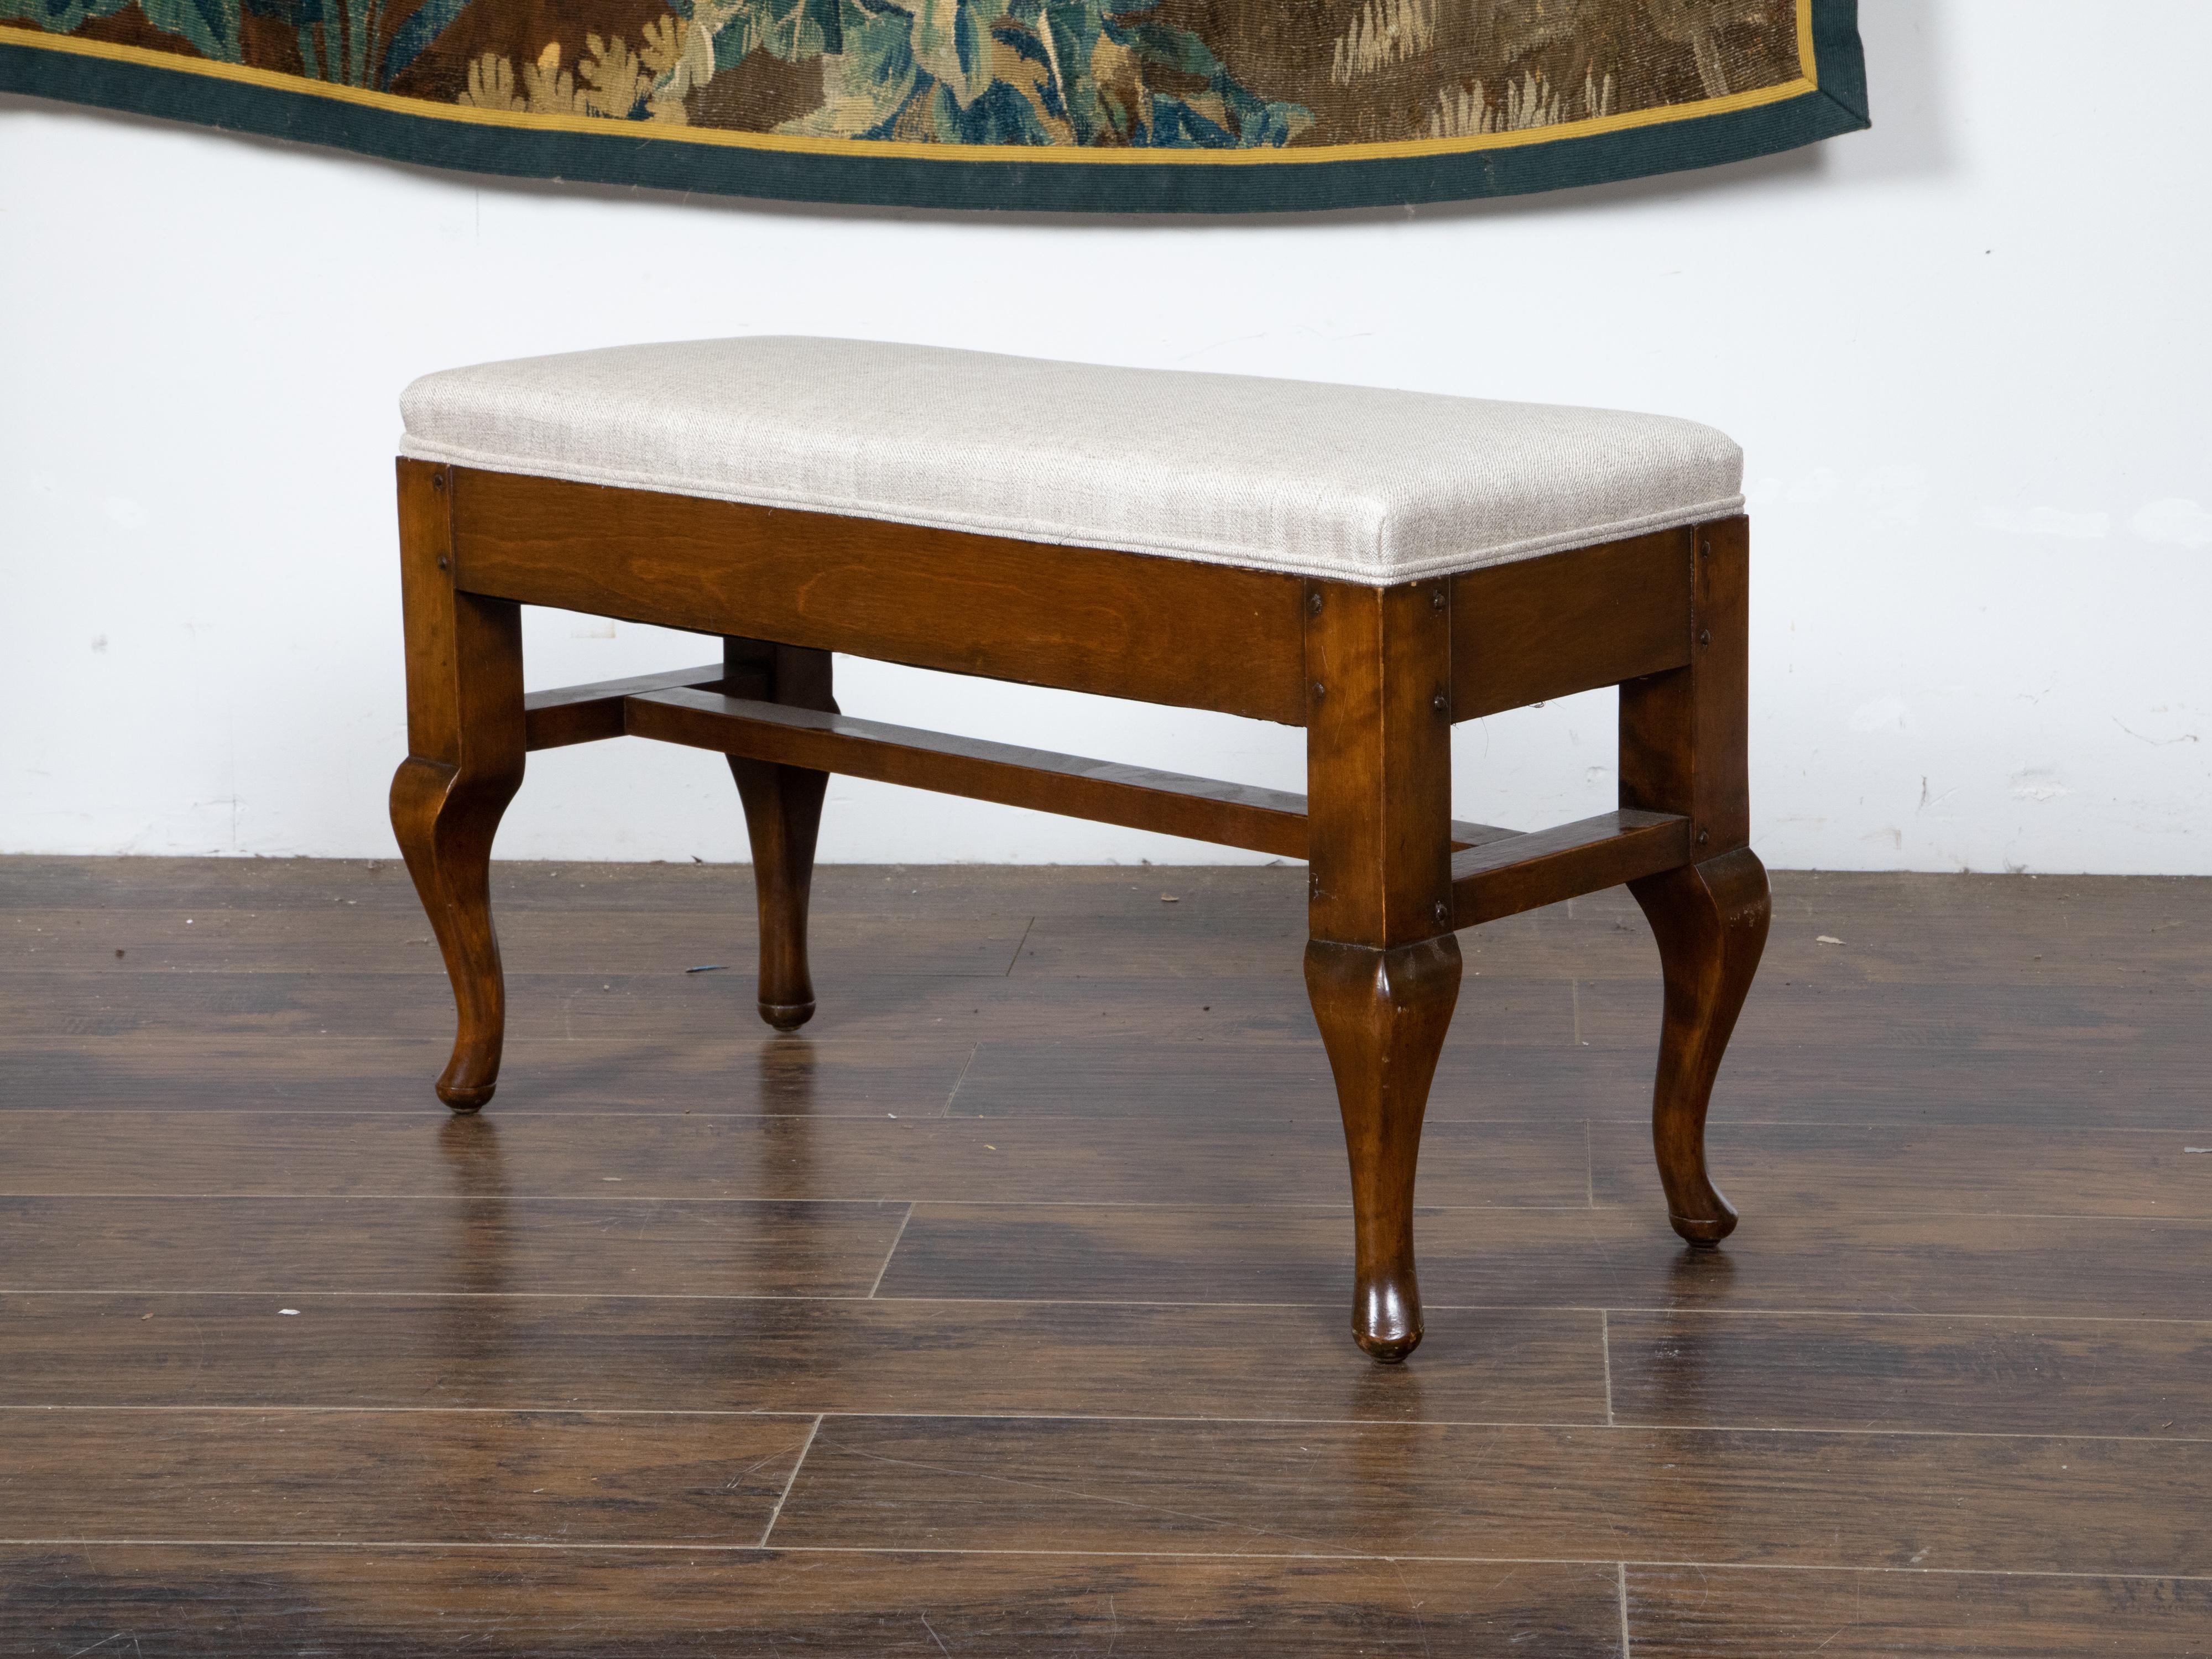 Carved Small French 1800s Wood Bench with Curving Legs, Cross Stretcher and Upholstery